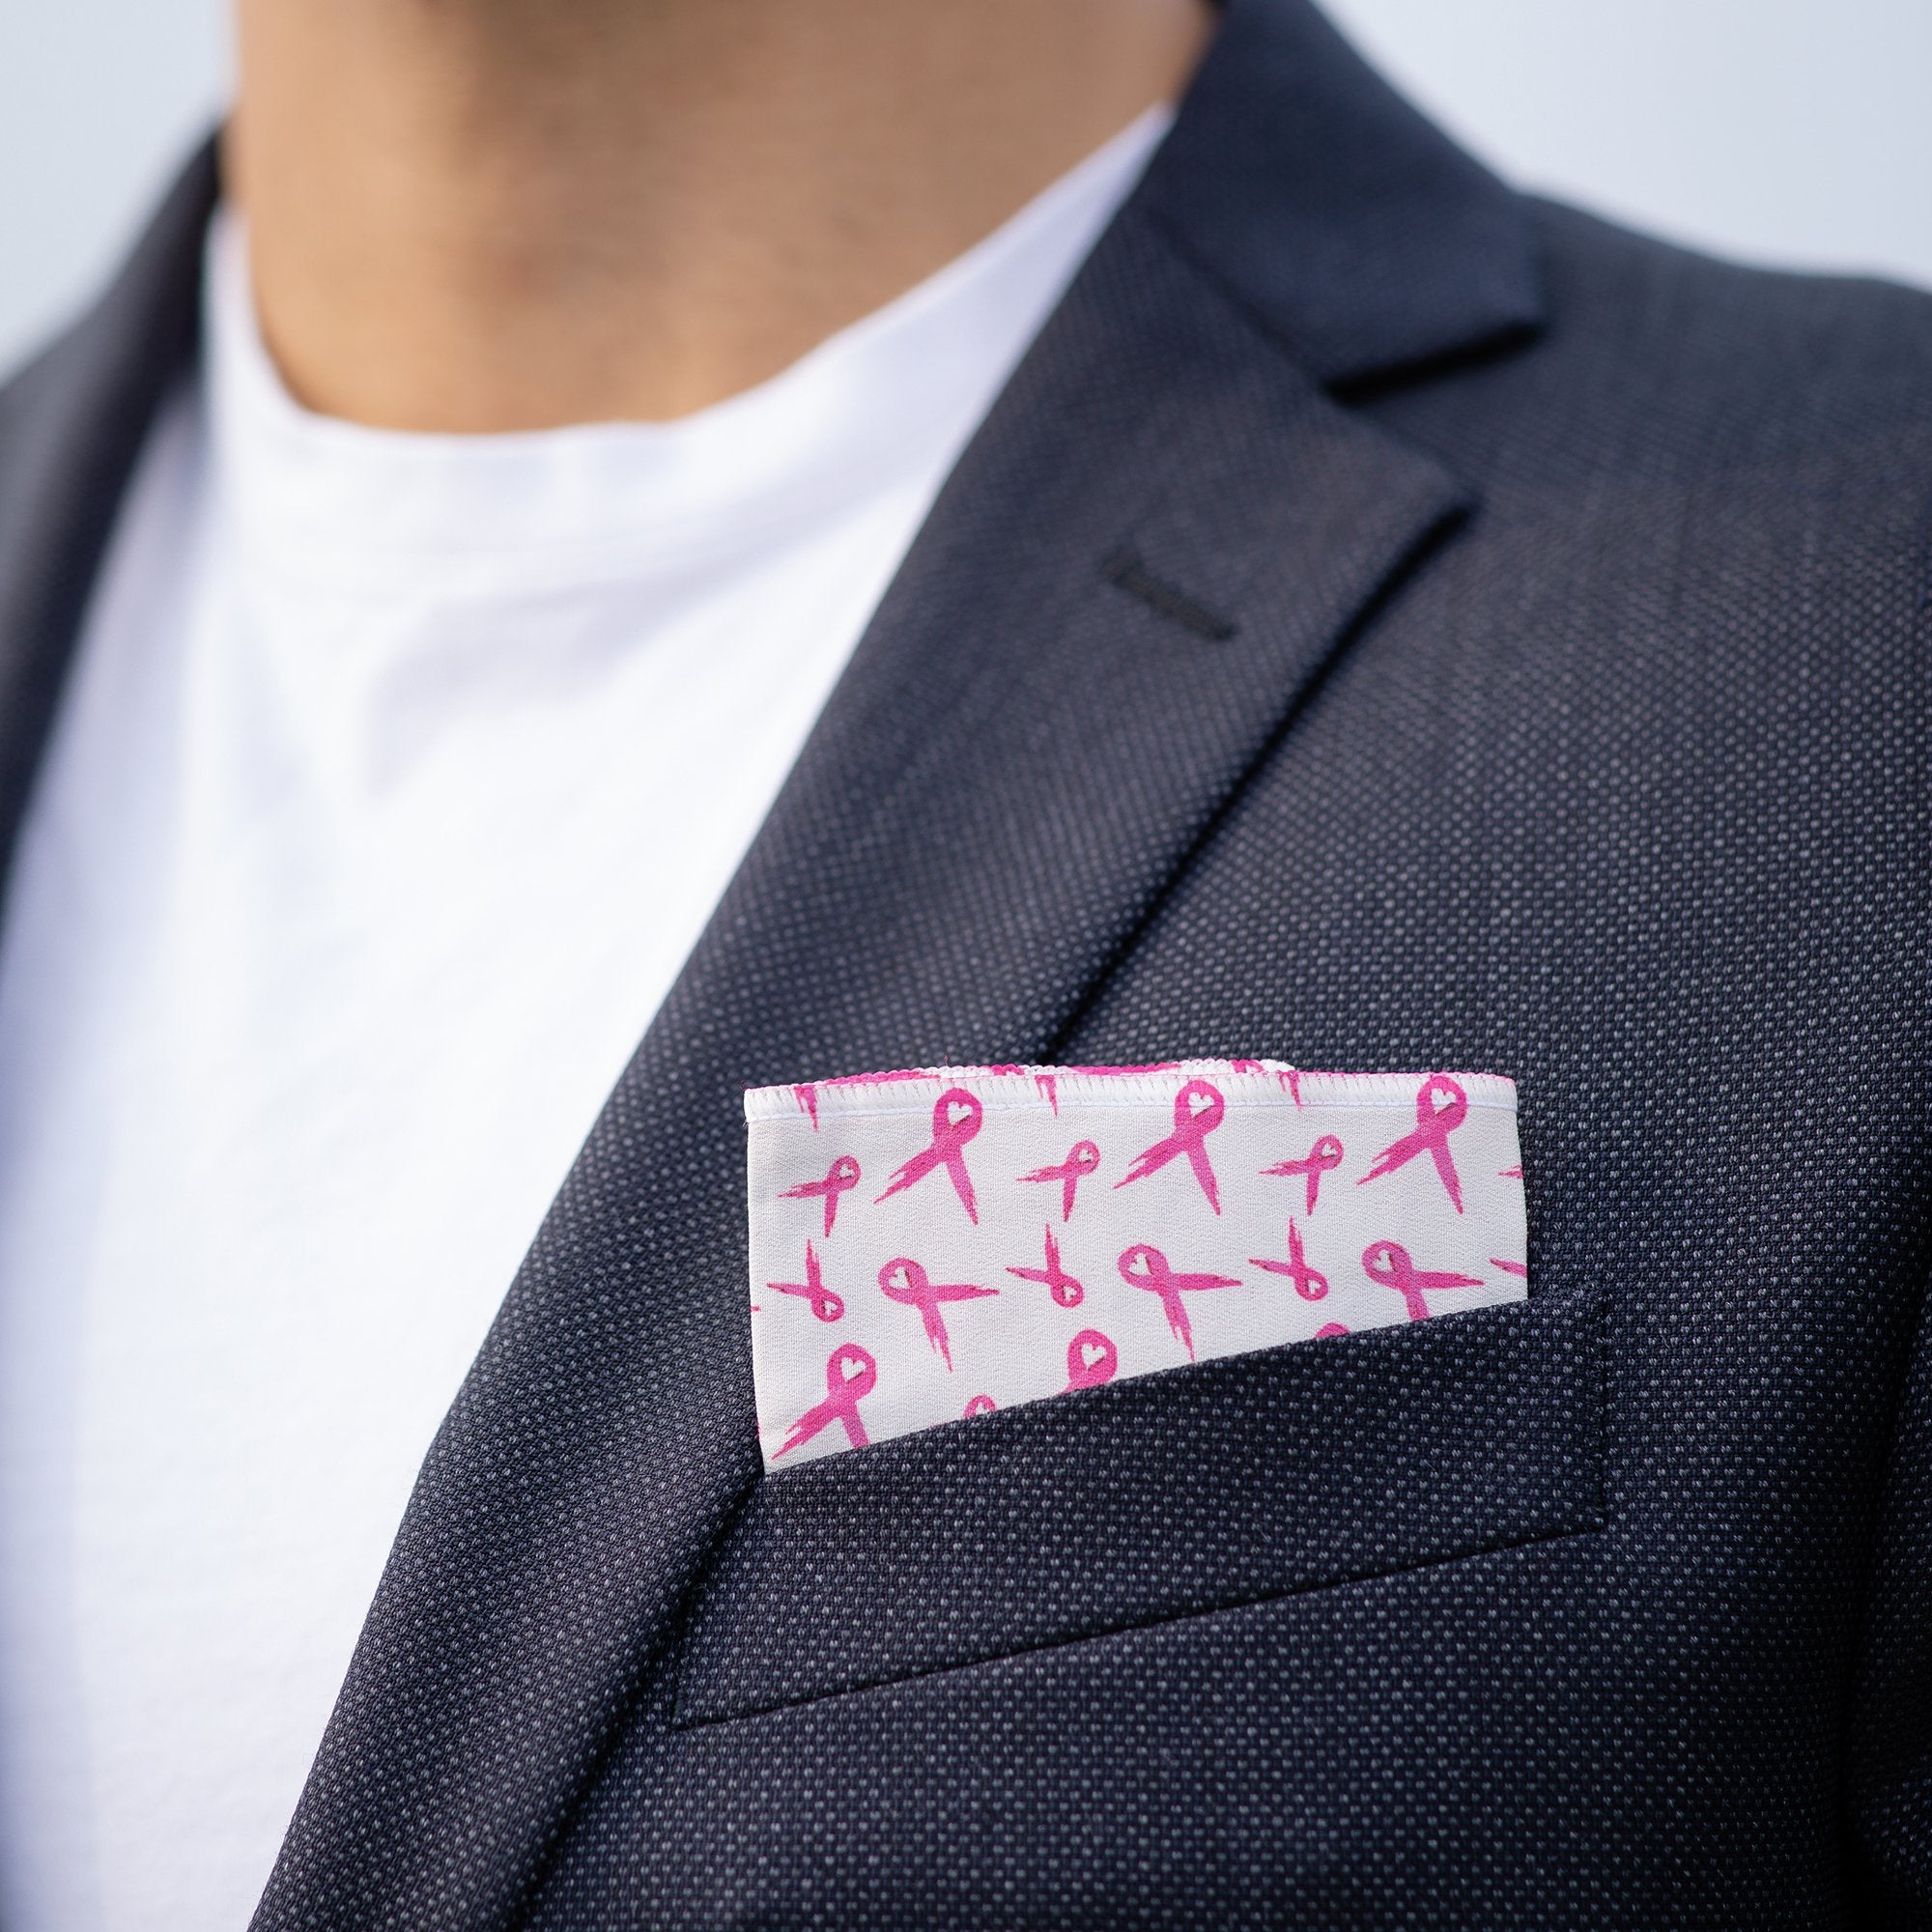 RARE CUT's Breast Cancer Awareness Pocket Square Worn in a Sports Jacket